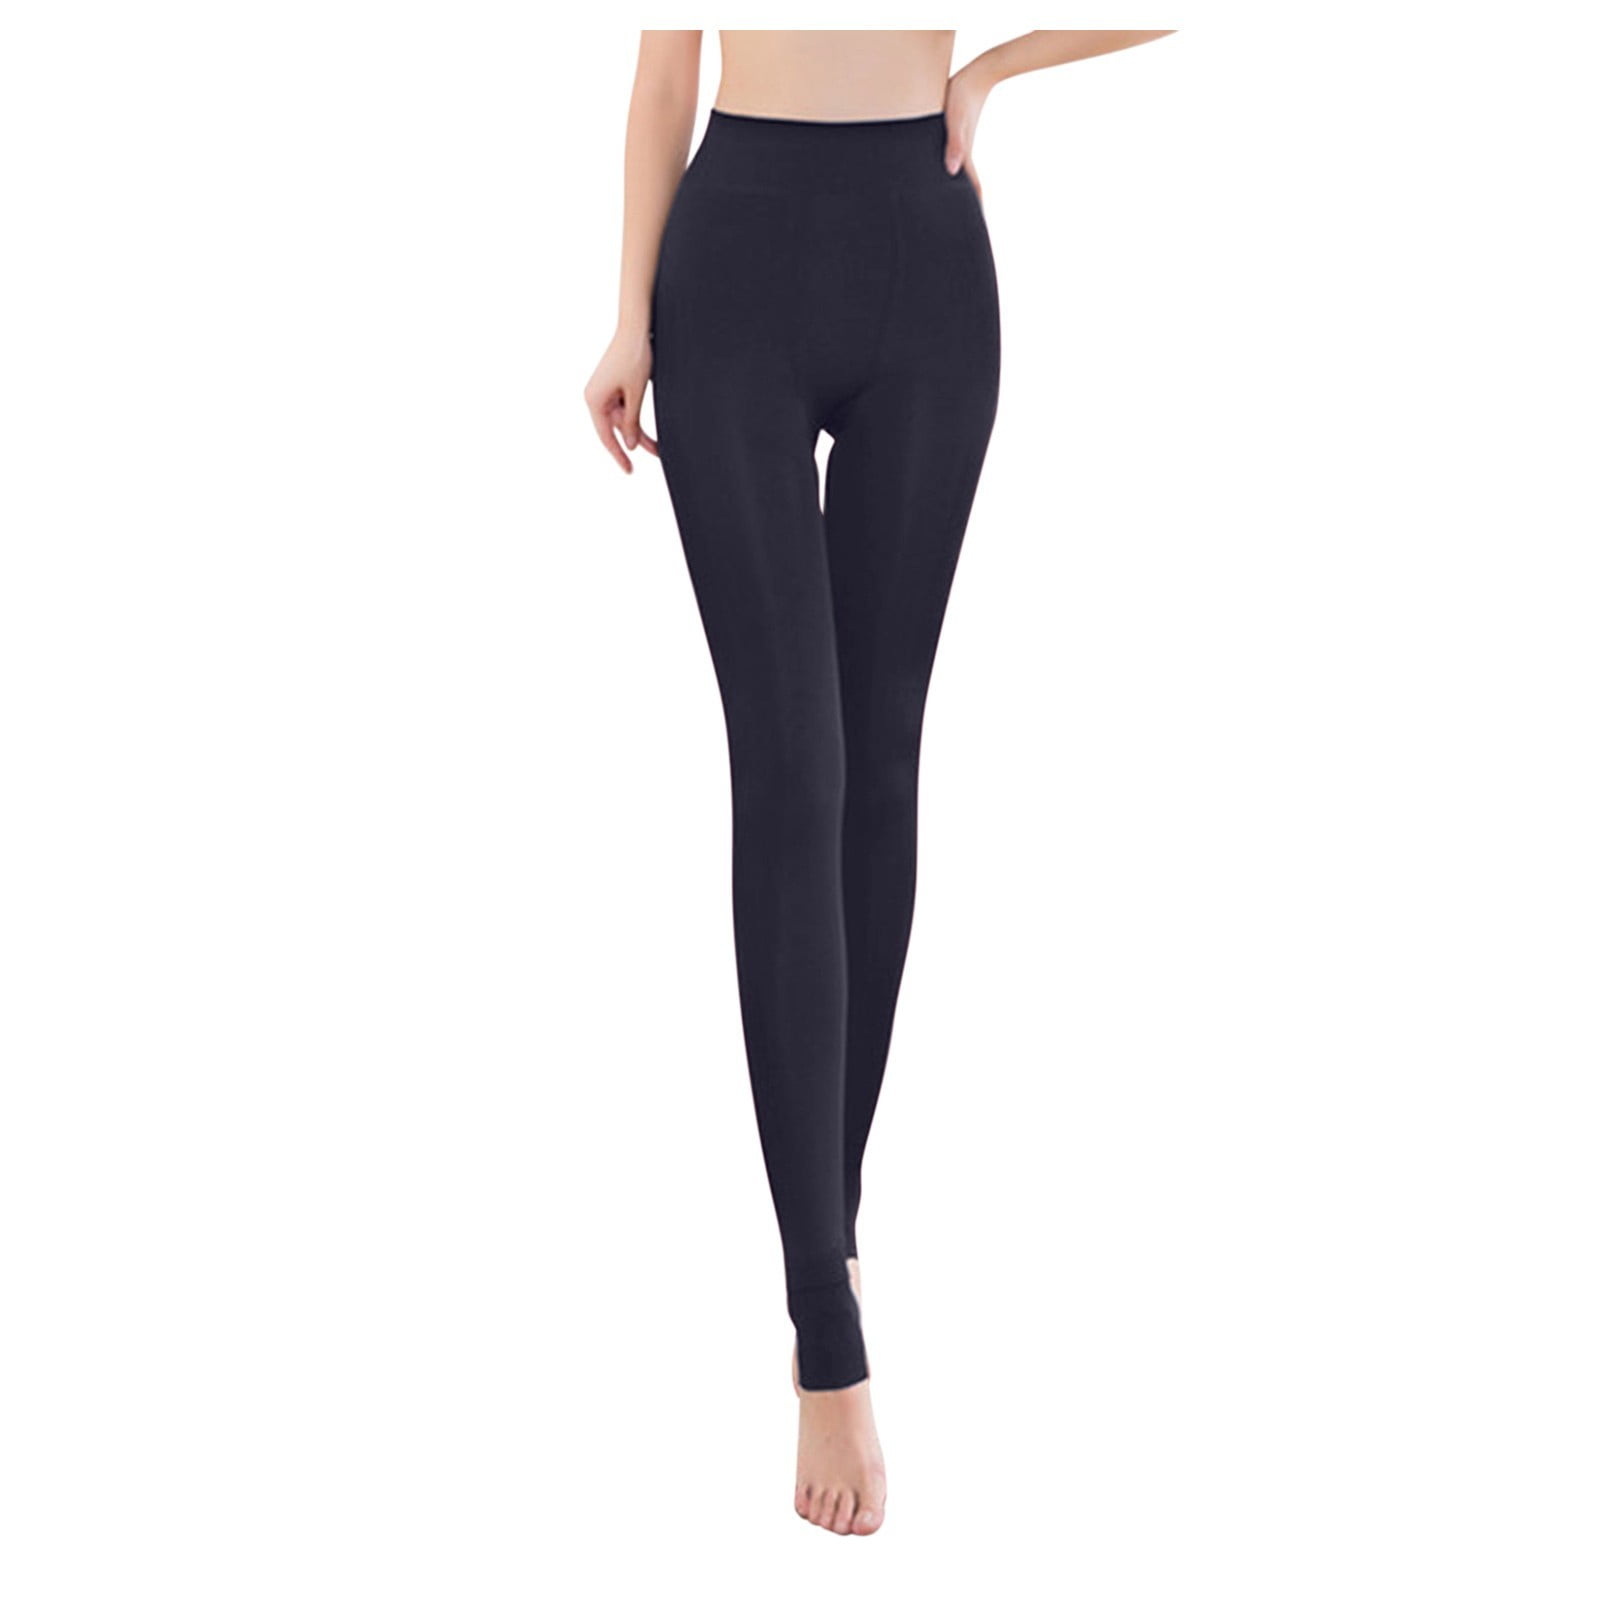 Leggings That Hide Cellulite Thickened Silken Mist Solid Color Seamless  Fleece Lined Maternity Business Pants for